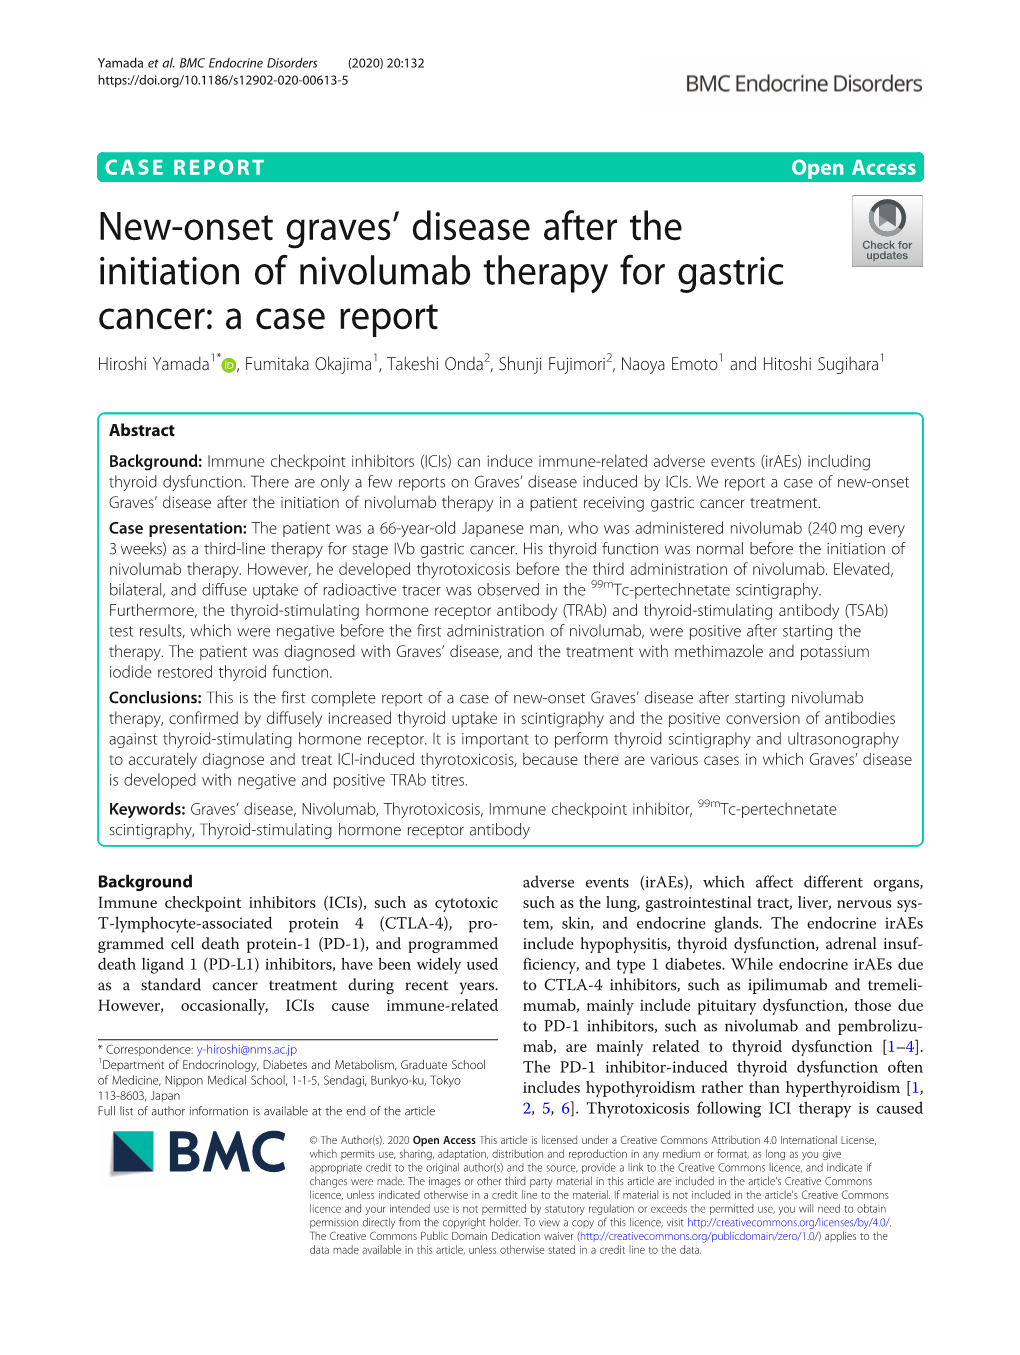 New-Onset Graves' Disease After The